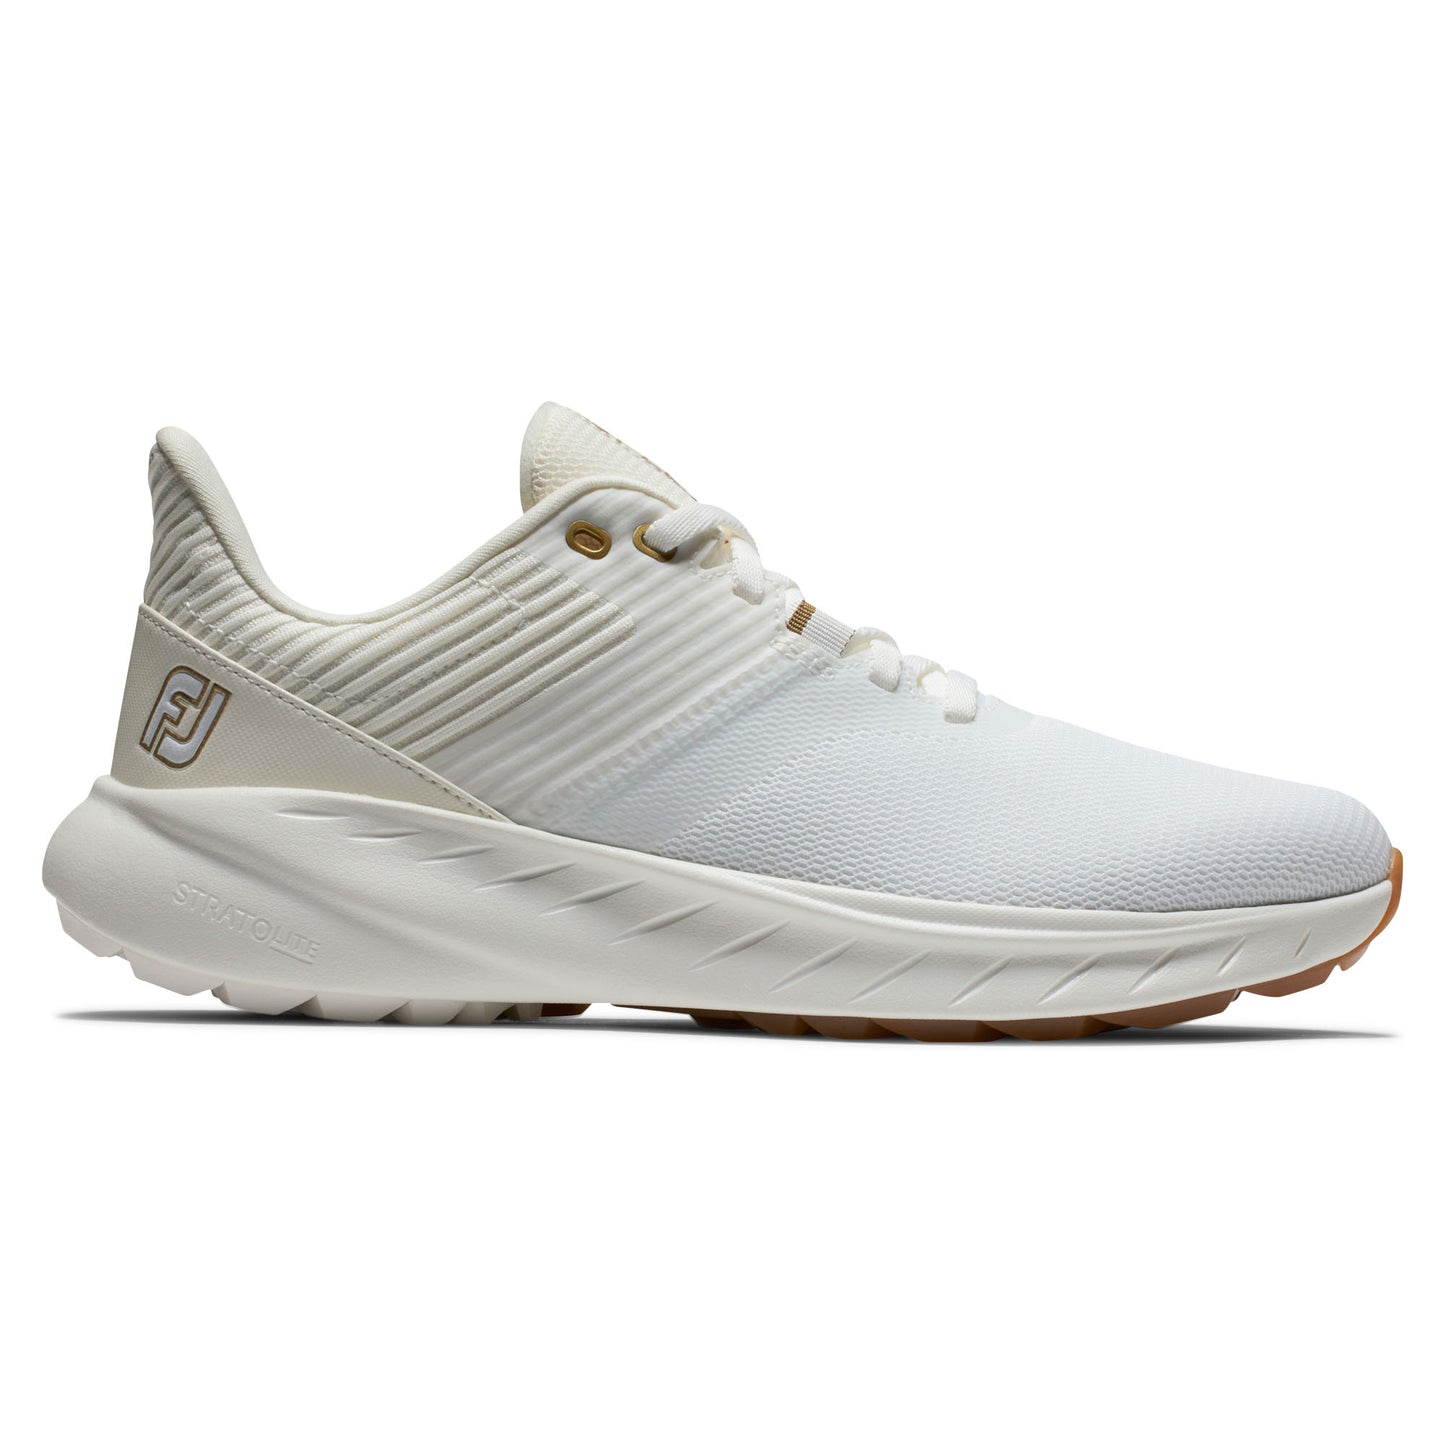 FootJoy Ladies Spikeless Flex Golf Shoes in White and Beige